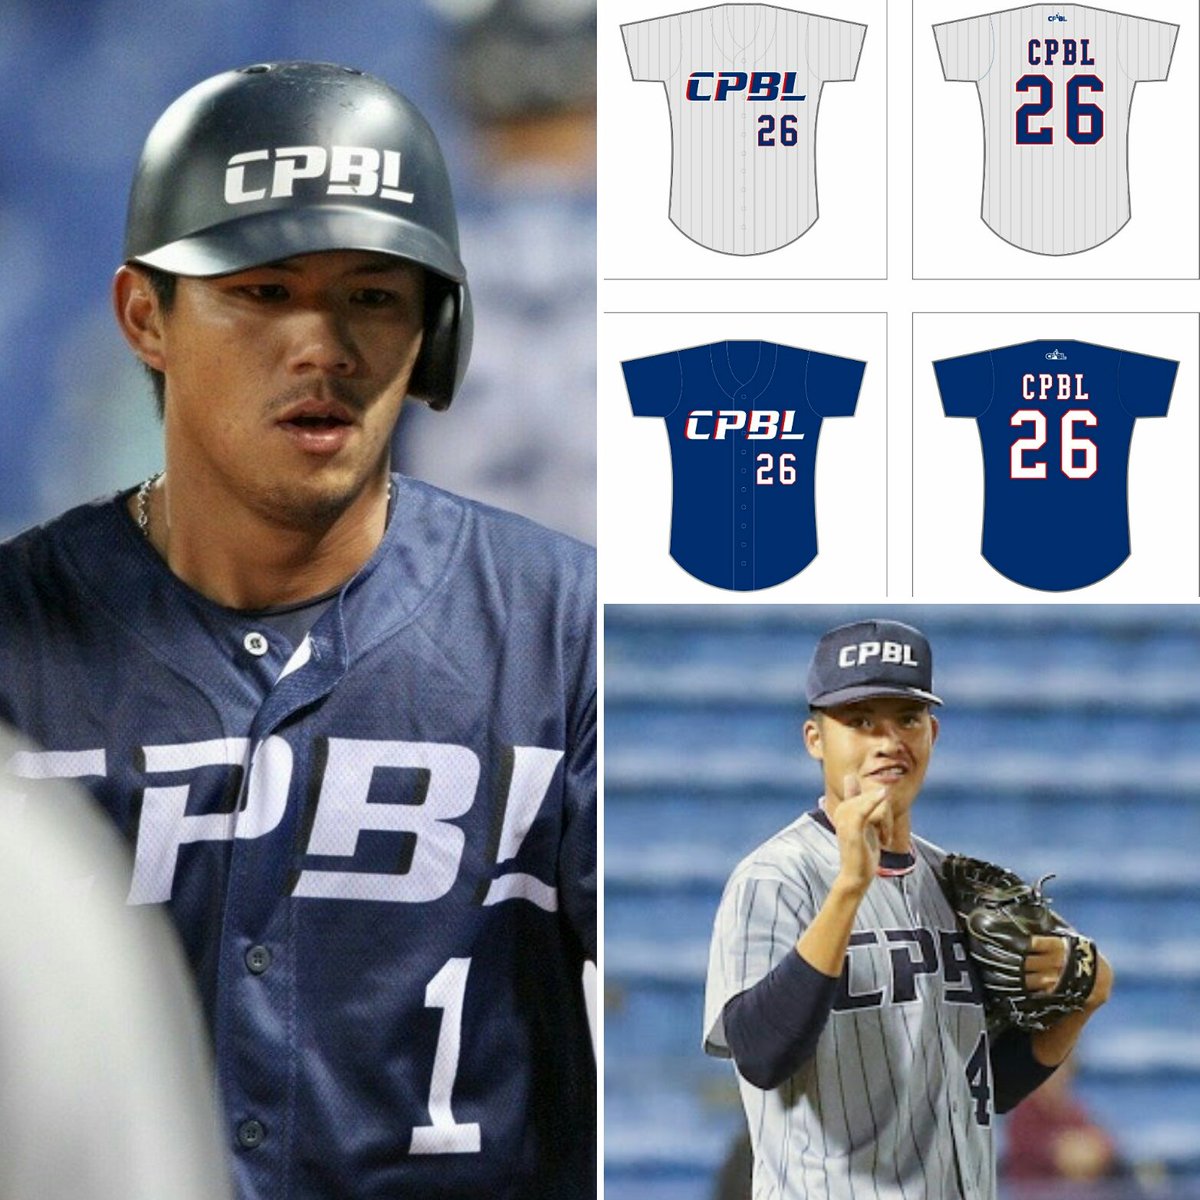 CPBL announce uniforms for CPBL All-Stars vs Samurai Japan exhibition games  - CPBL STATS